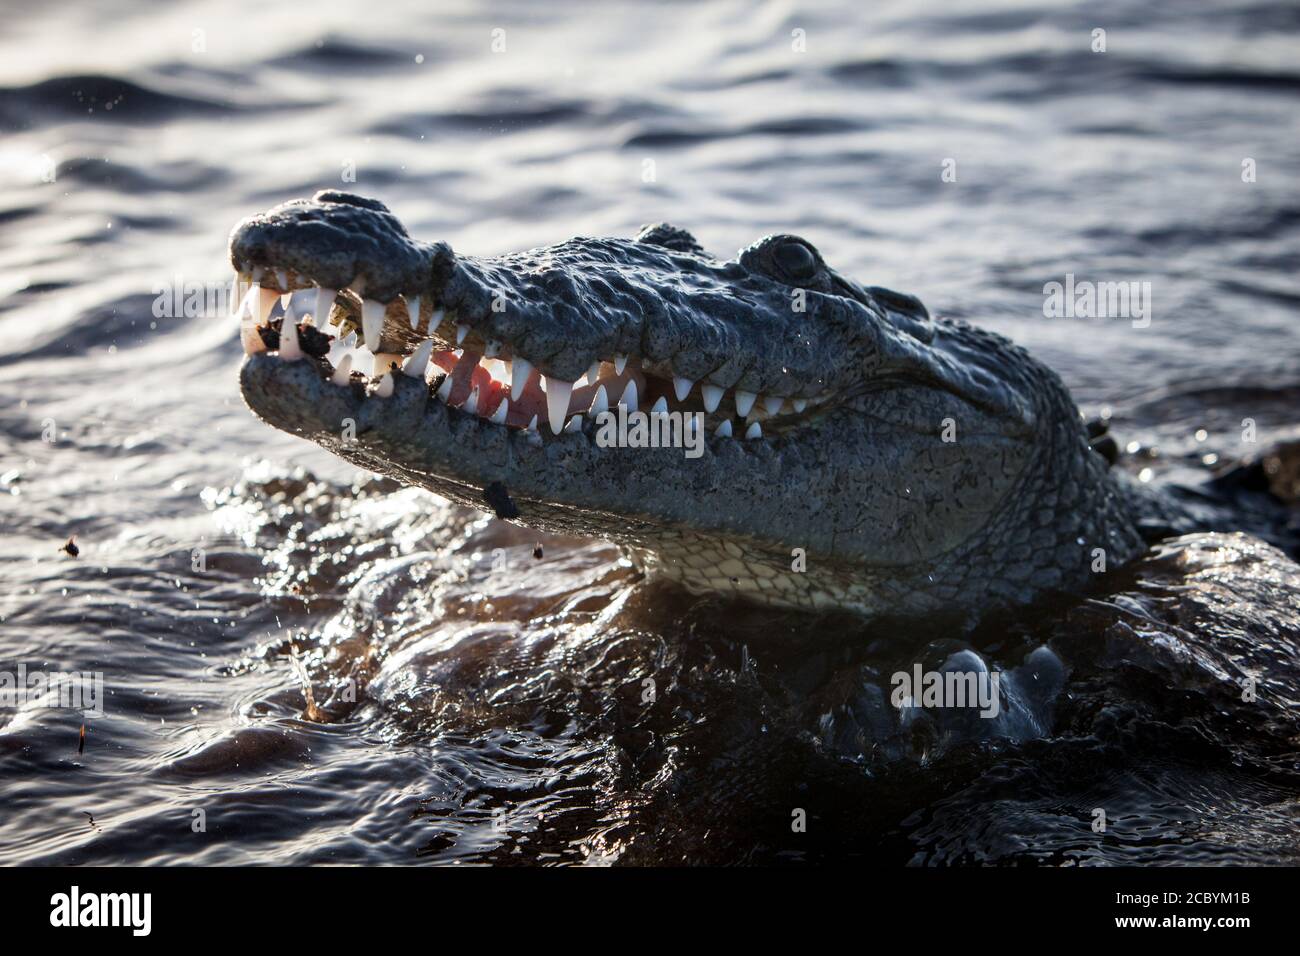 An American crocodile, Crocodylus acutus, lurks at the water's edge in the Caribbean Sea in Belize. These are dangerous and sneaky predators. Stock Photo